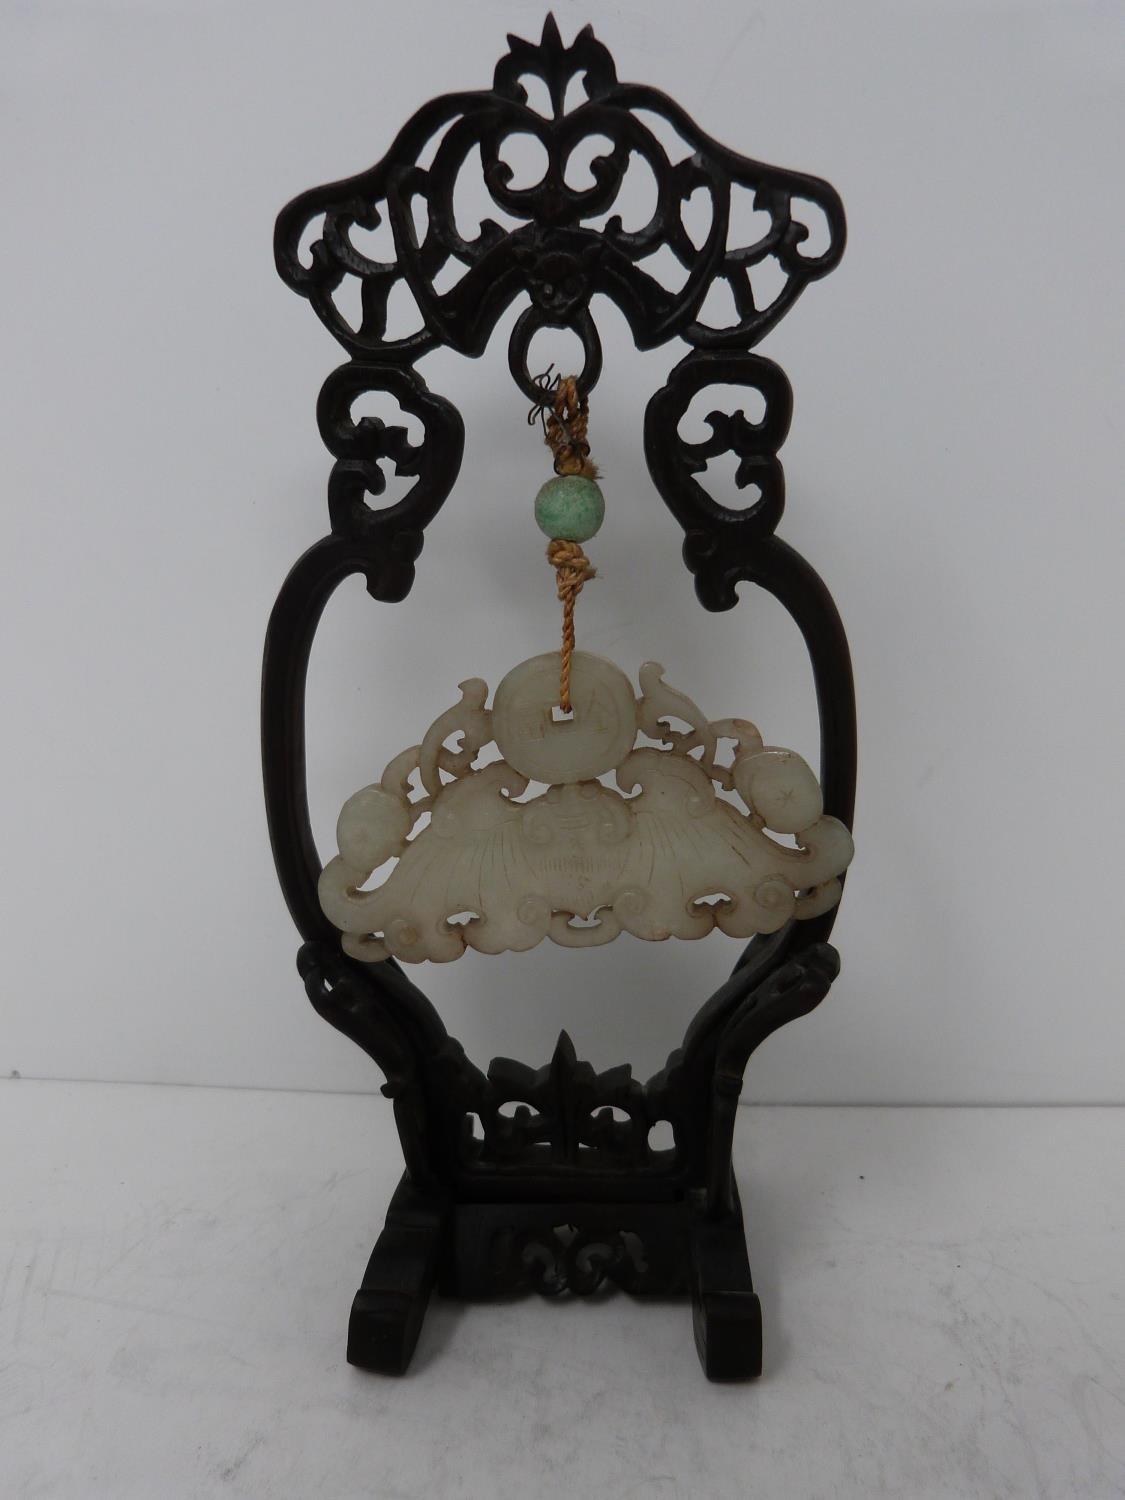 An early 20th century jade pendant on carved wooden stand. Pale celadon jade pendant in the form